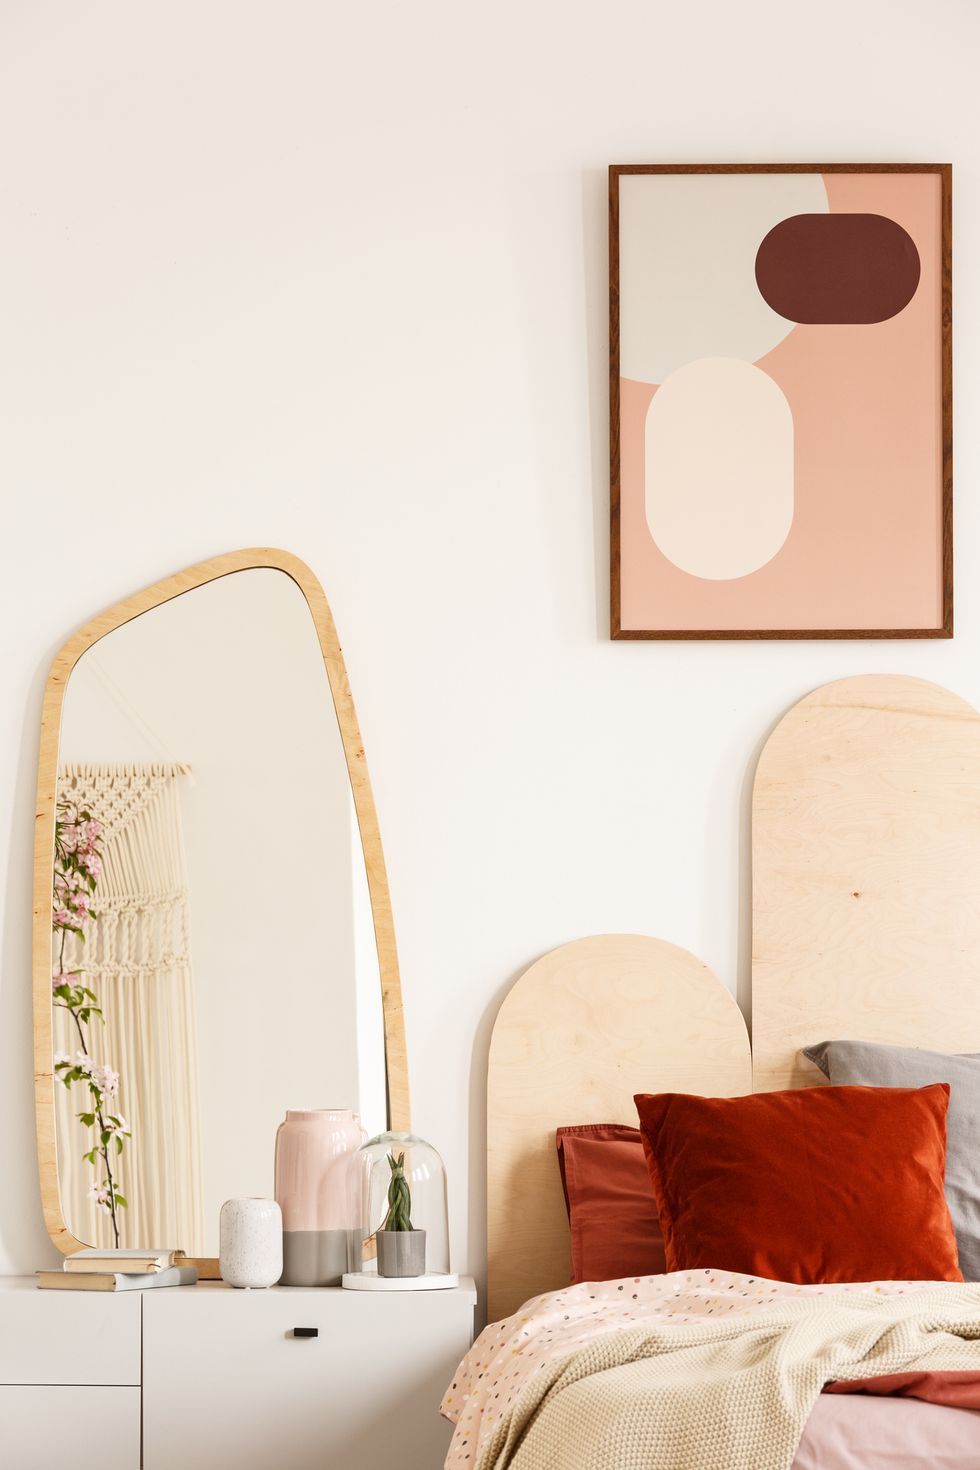 mirror on white cabinet next to bed with red cushions under poster in pastel bedroom interior real photo